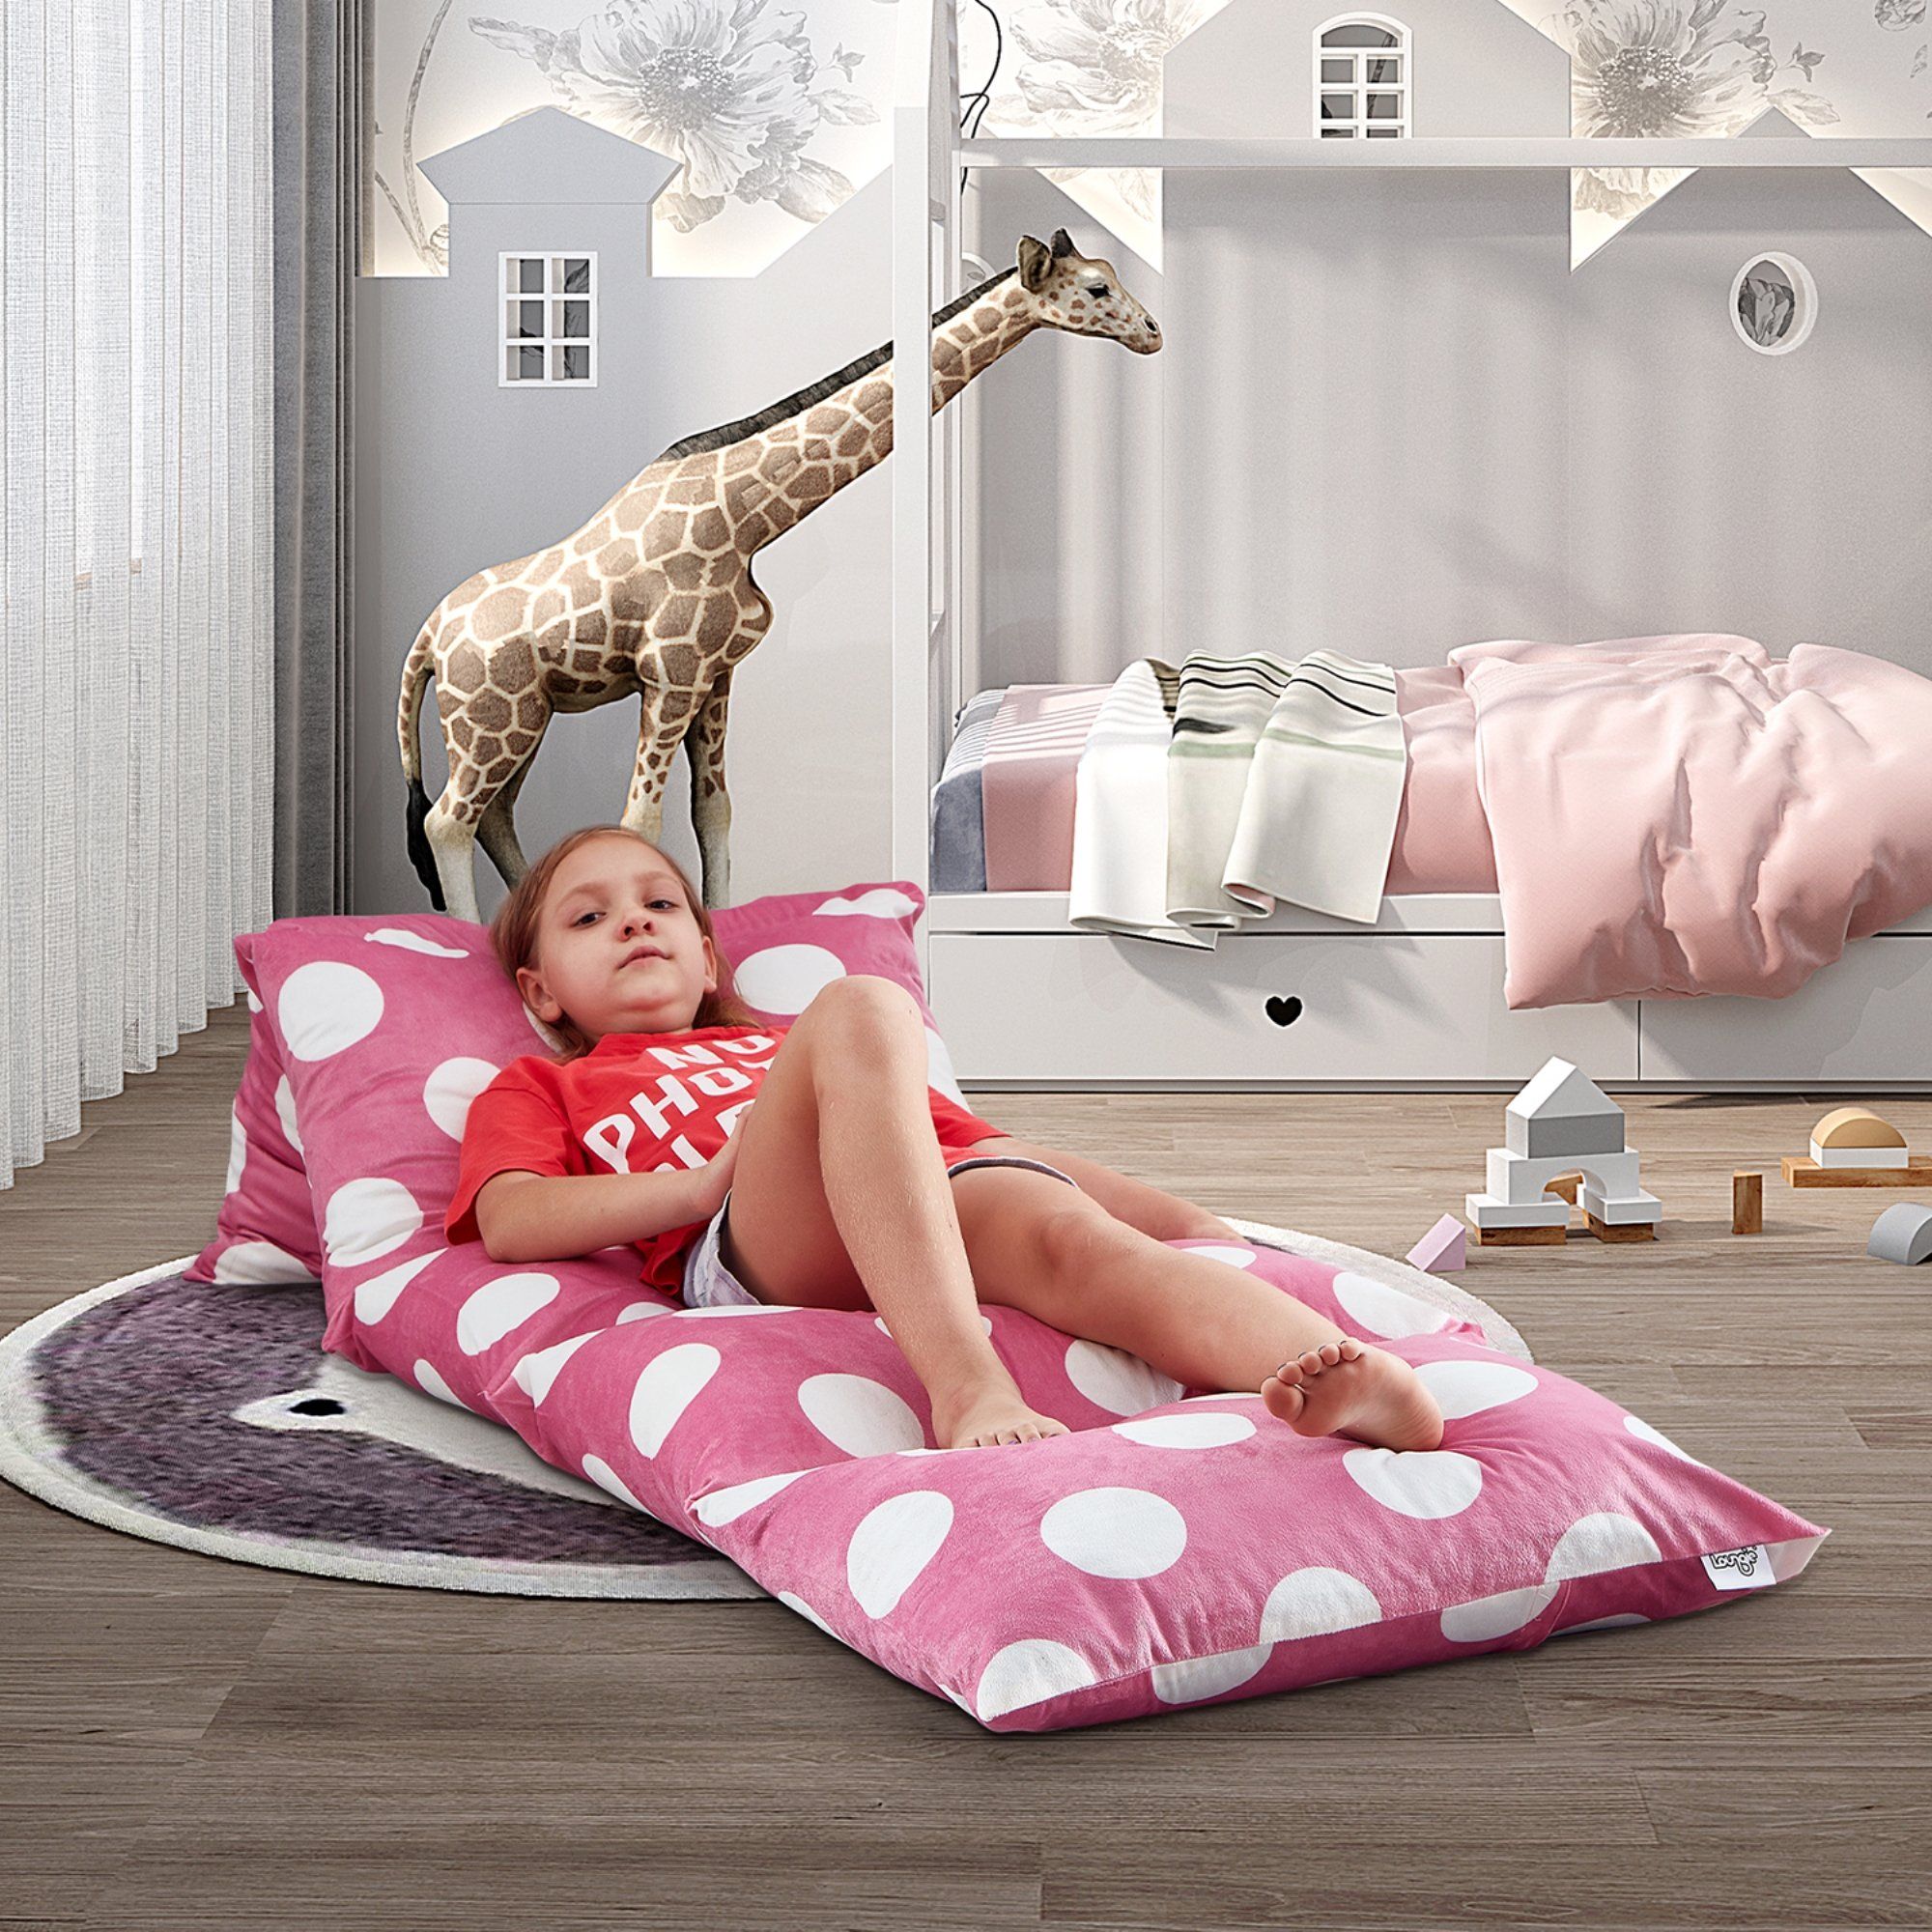 Loungie 55 Stuffed Animal Storage Bean Bag Cover For Bedroom